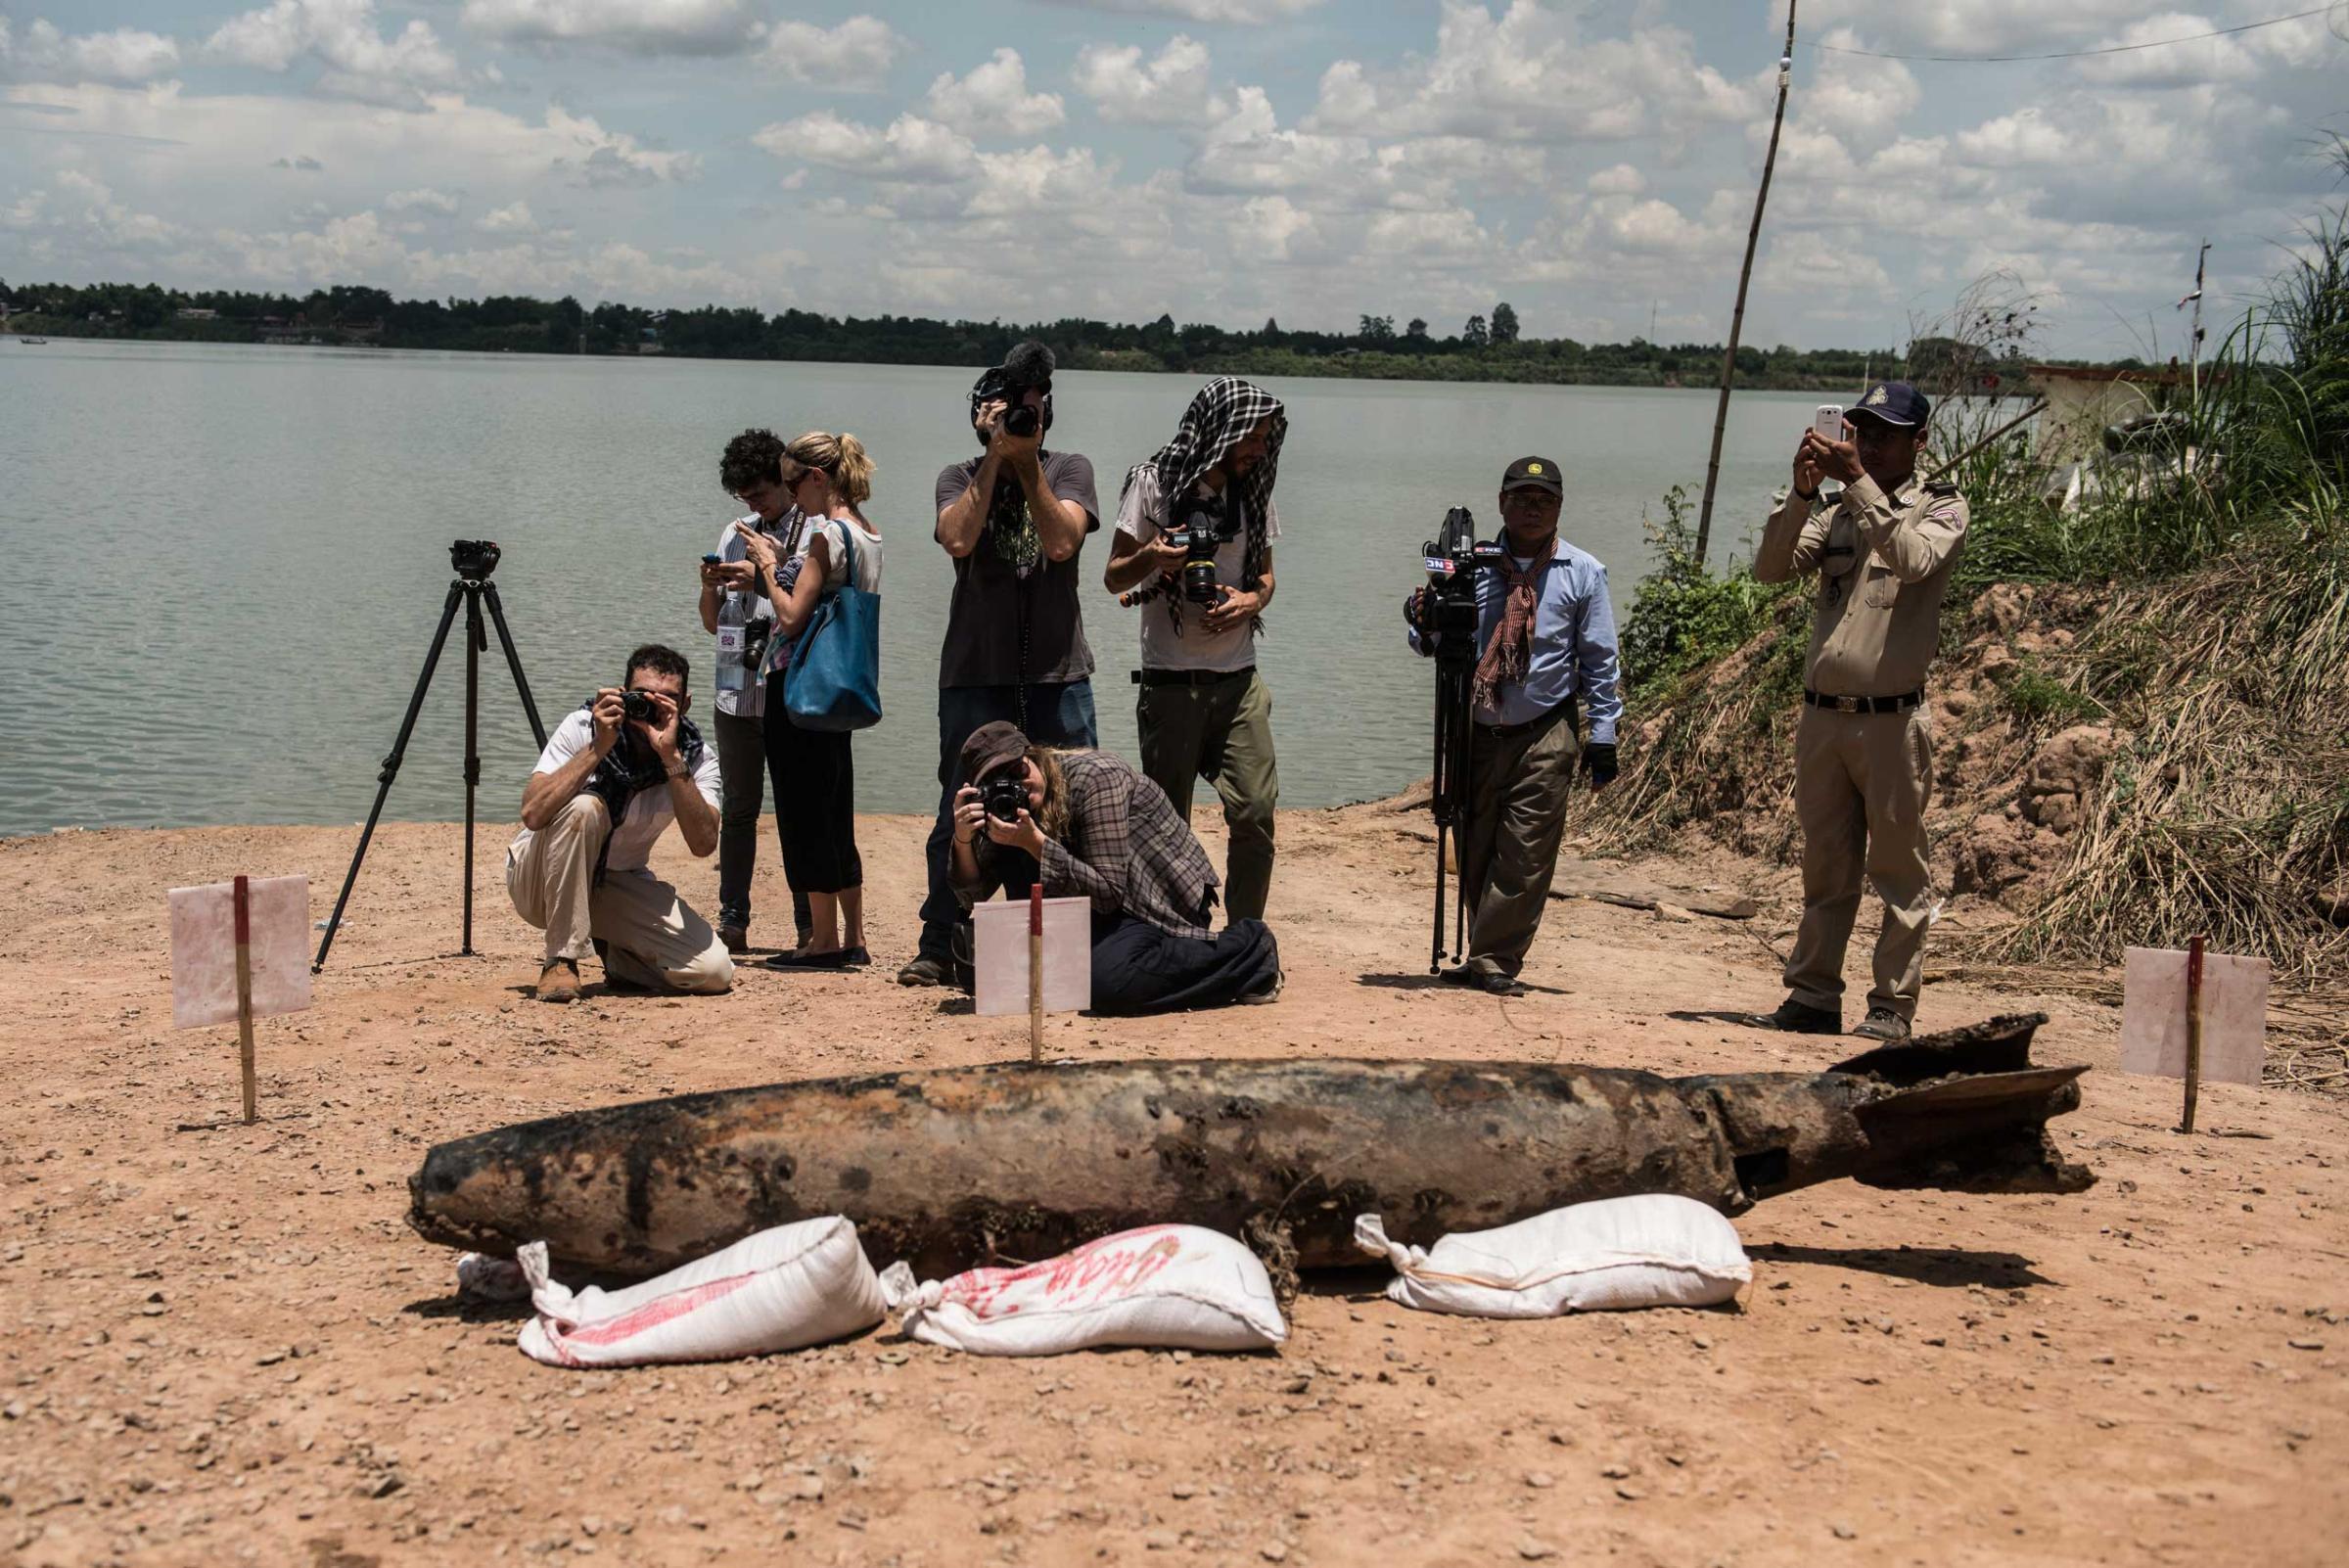 Journalists report on the MK82 Bomb which the diver team raised from the bottom of the Mekong River in March 2015.